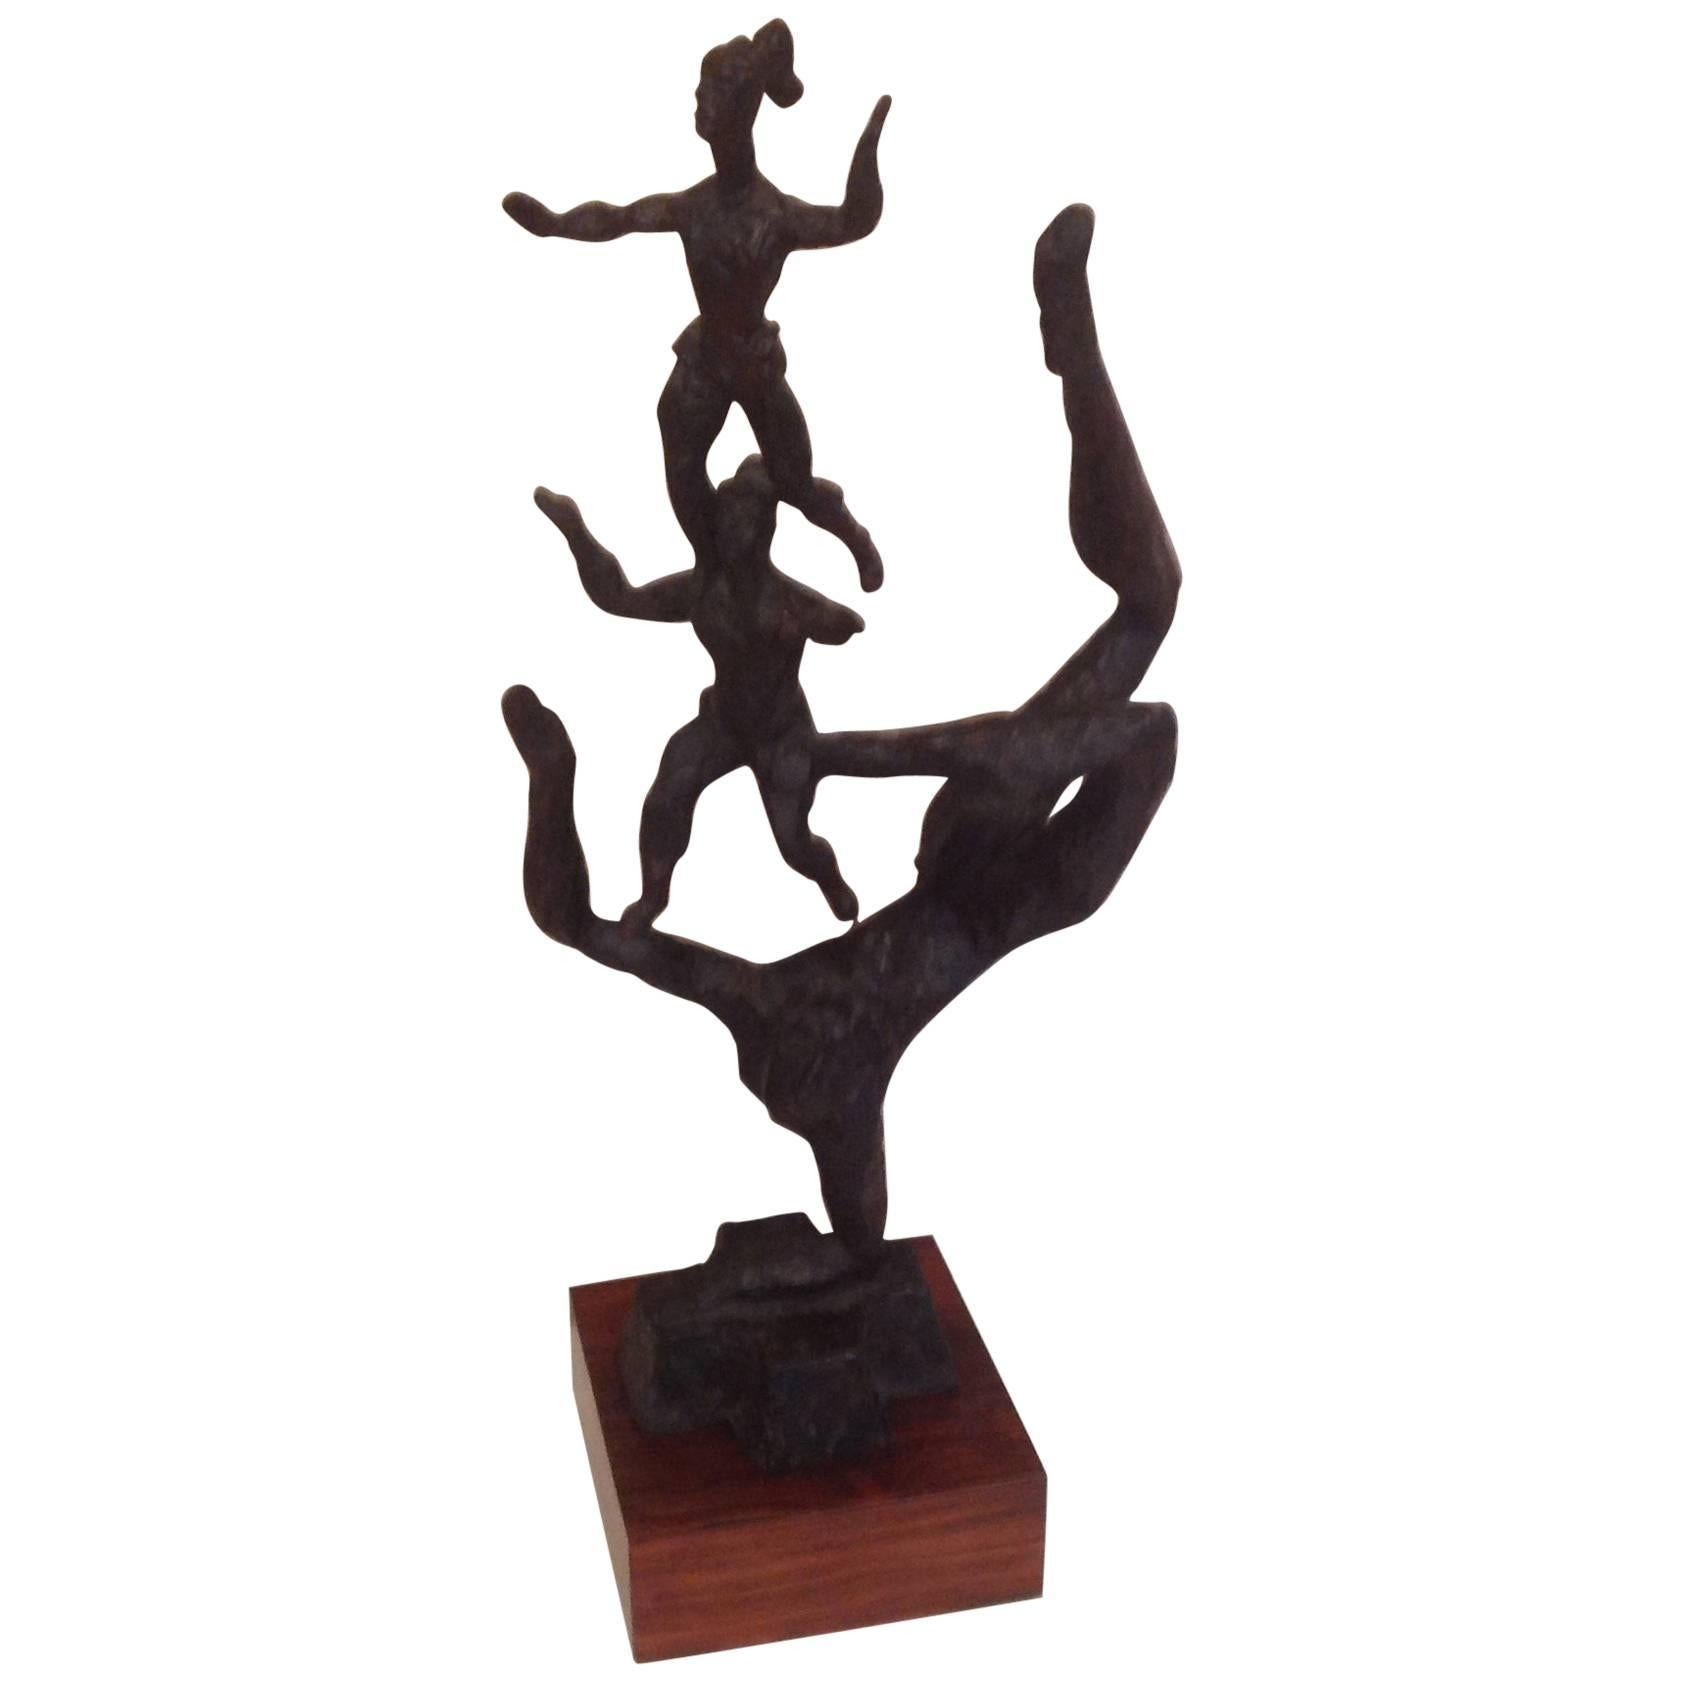 Signed Monumental Chaim Gross Acrobat Sculpture with Original Rotating Stand